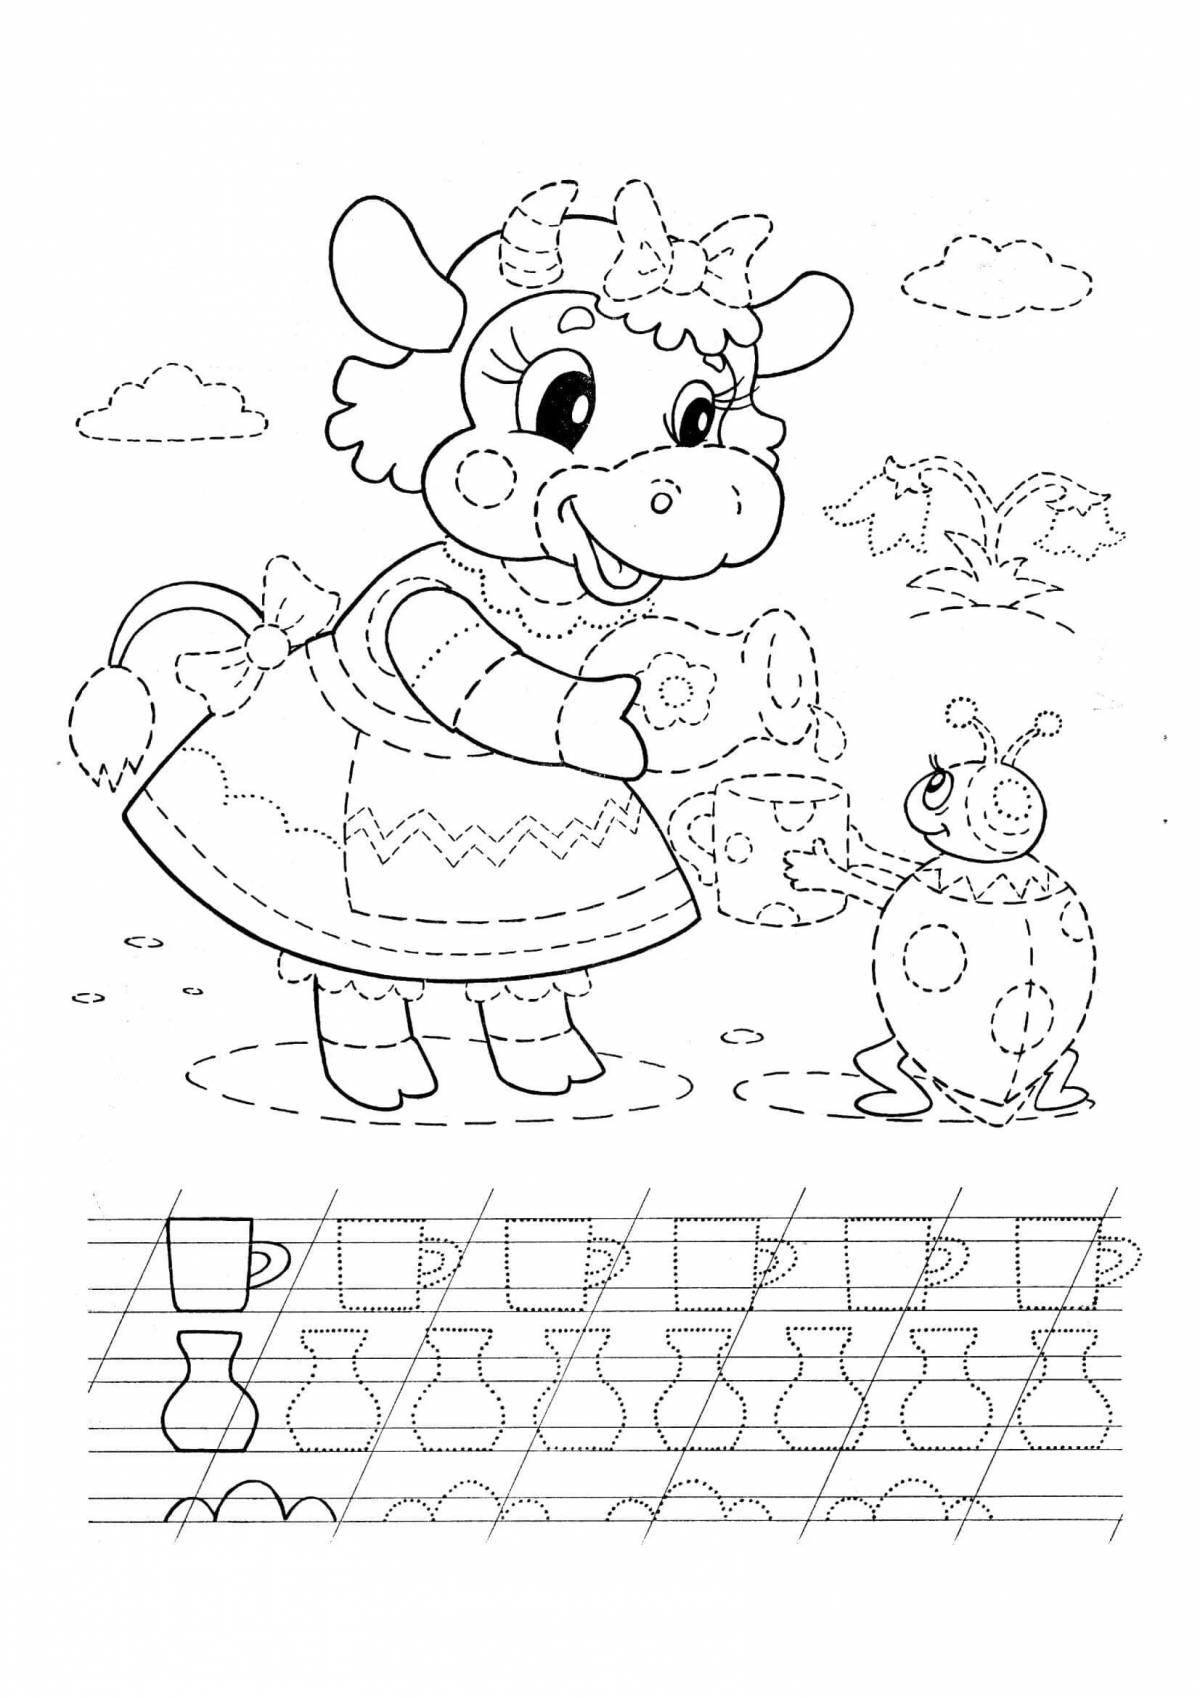 Playful recipe coloring page for kids